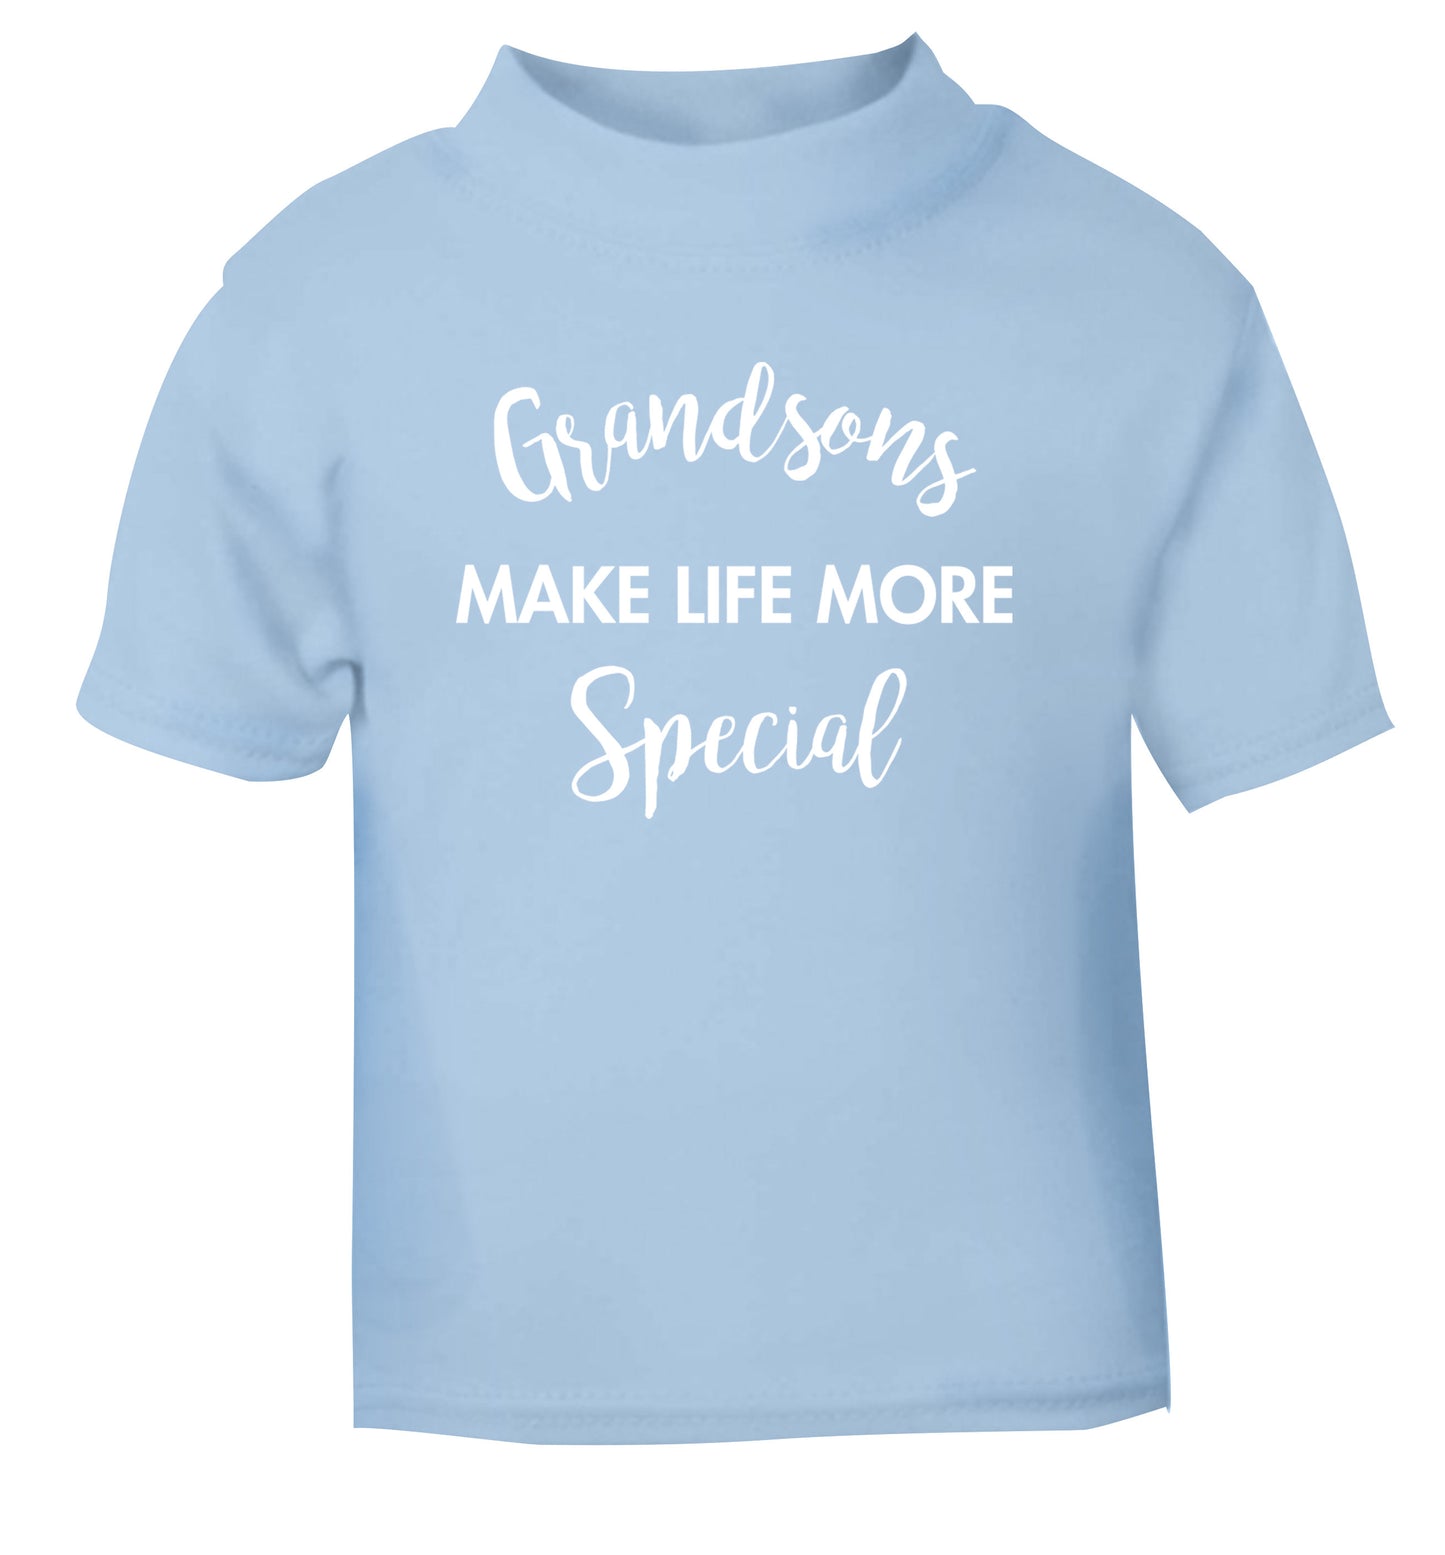 Grandsons make life more special light blue Baby Toddler Tshirt 2 Years